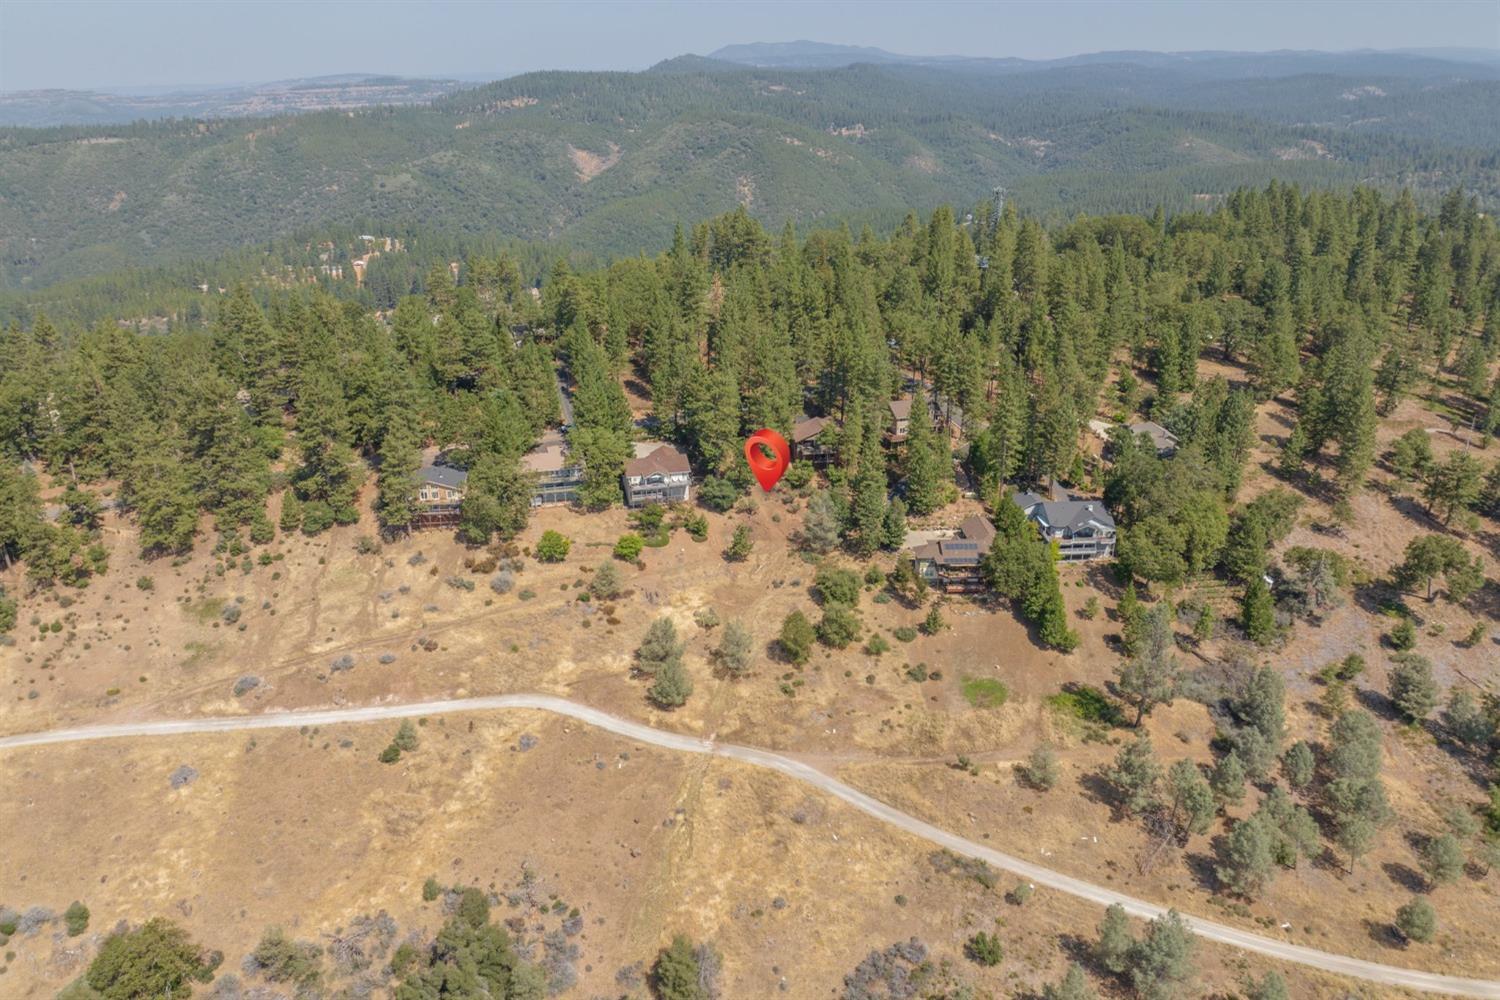 VIEWS! This beautiful .27 acre lot nestled in the trees features amazing panoramic views of the Stanislaus Valley River Canyon. Located in the gated community of Forest Meadows. Just minutes from downtown Murphys and wineries and golf (or a short drive to lakes, Calaveras Big Trees State Park or skiing). Lot includes plans for a 2,162sf open concept main floor 3 bedroom/2 bathmountain house. Plus, an unfinished 1321sf basement plan for 4-planned rooms (4-window studio, 2-window workshop, storage area and 1/2 bath). Community amenities include: security gate/patrols, underground utilities available, common area maintenance, snowplowing of main roads, clubhouse, 2 pools & parks, tennis/pickle-ball/basketball/bocce courts, playgrounds, dog park, walking/hiking trails...and so much more.